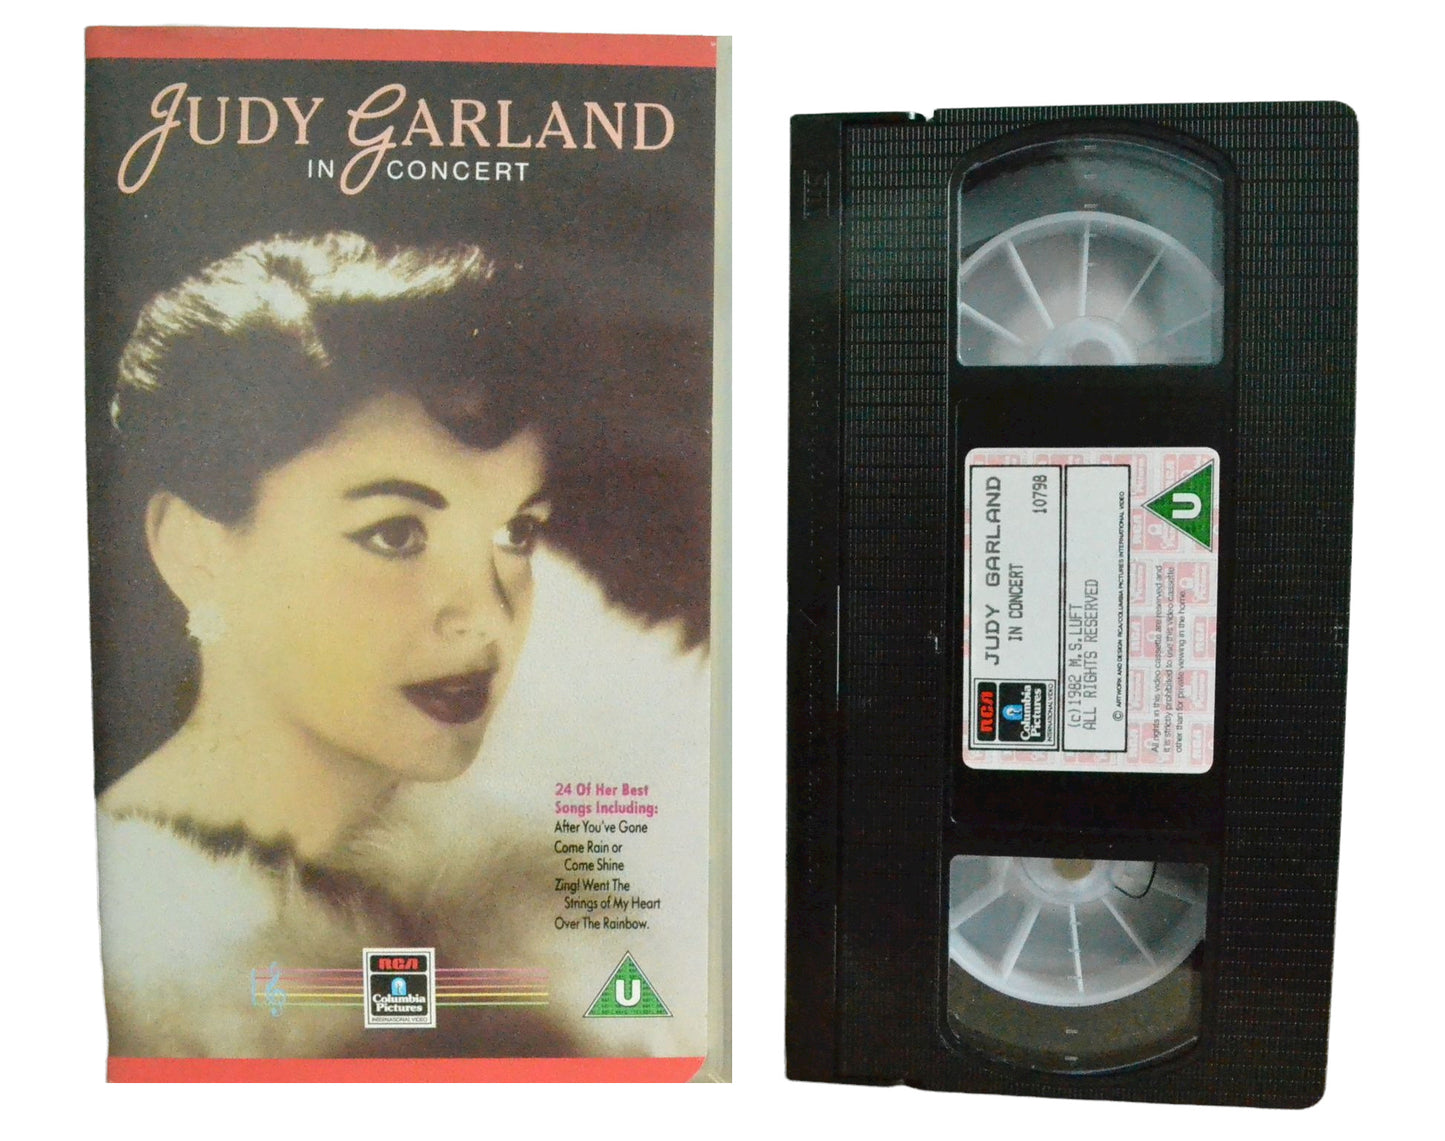 Judy Garland In Concert - Judy Garland - Columbia Pictures - Music - Pal VHS-